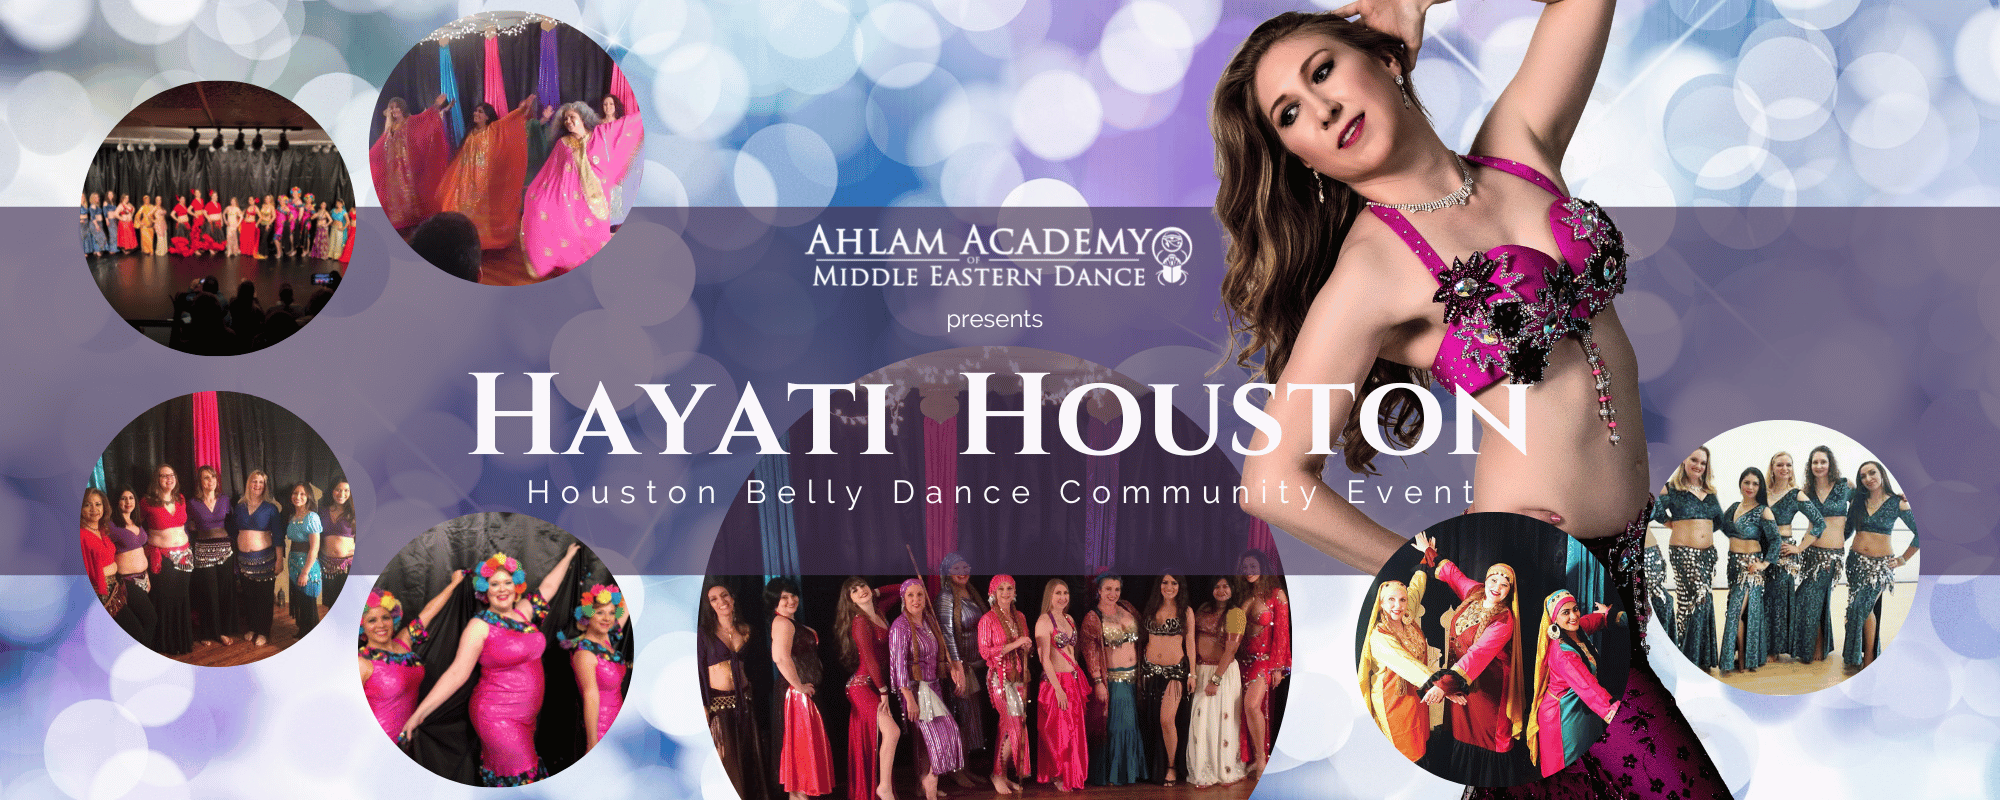 Featured Image of Hayati Houston - Houston Belly Dance Community Event presented by Anna of Ahlam Academy